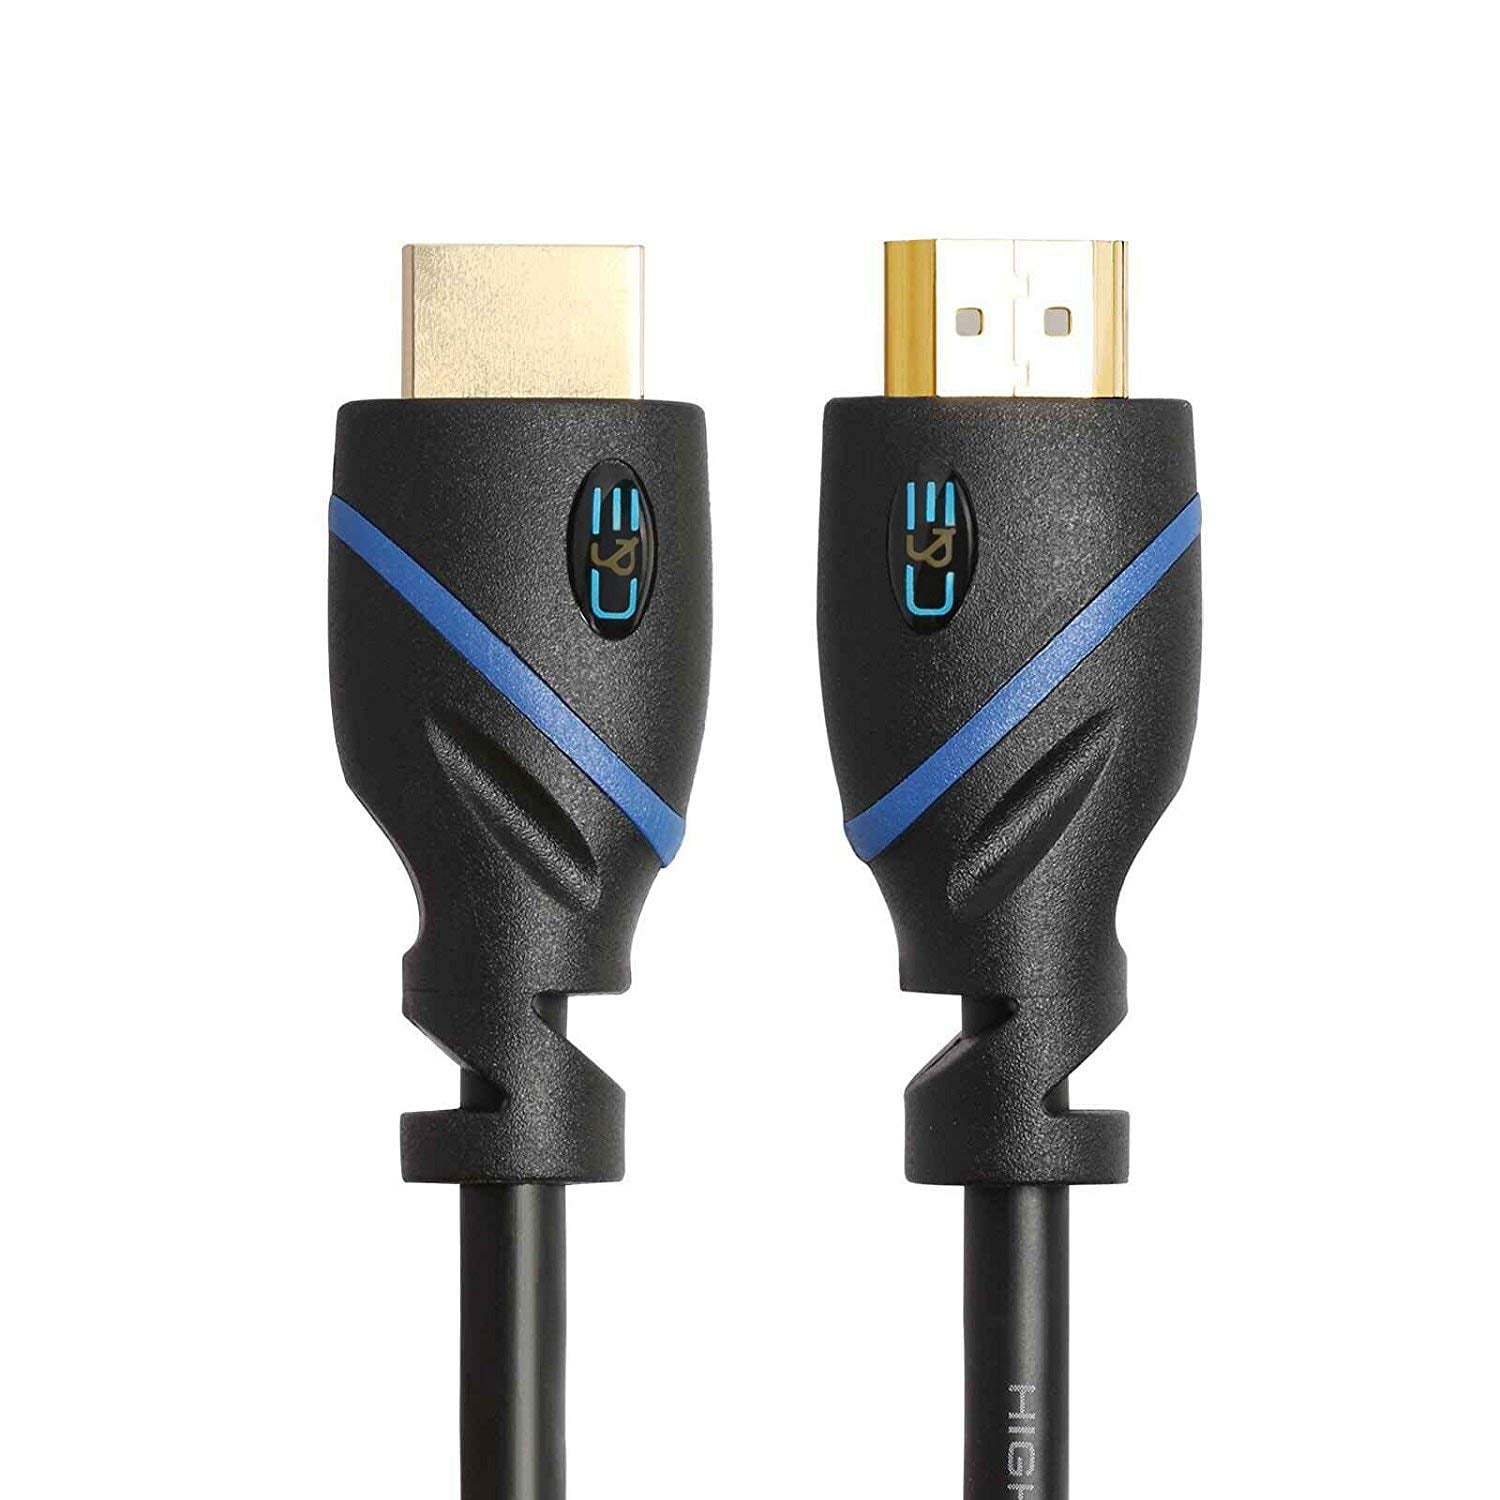 BLACK 1m 15m Meter HDMI v1.4 High Speed HD Cable 3D 4K 1080p Definition Lead 